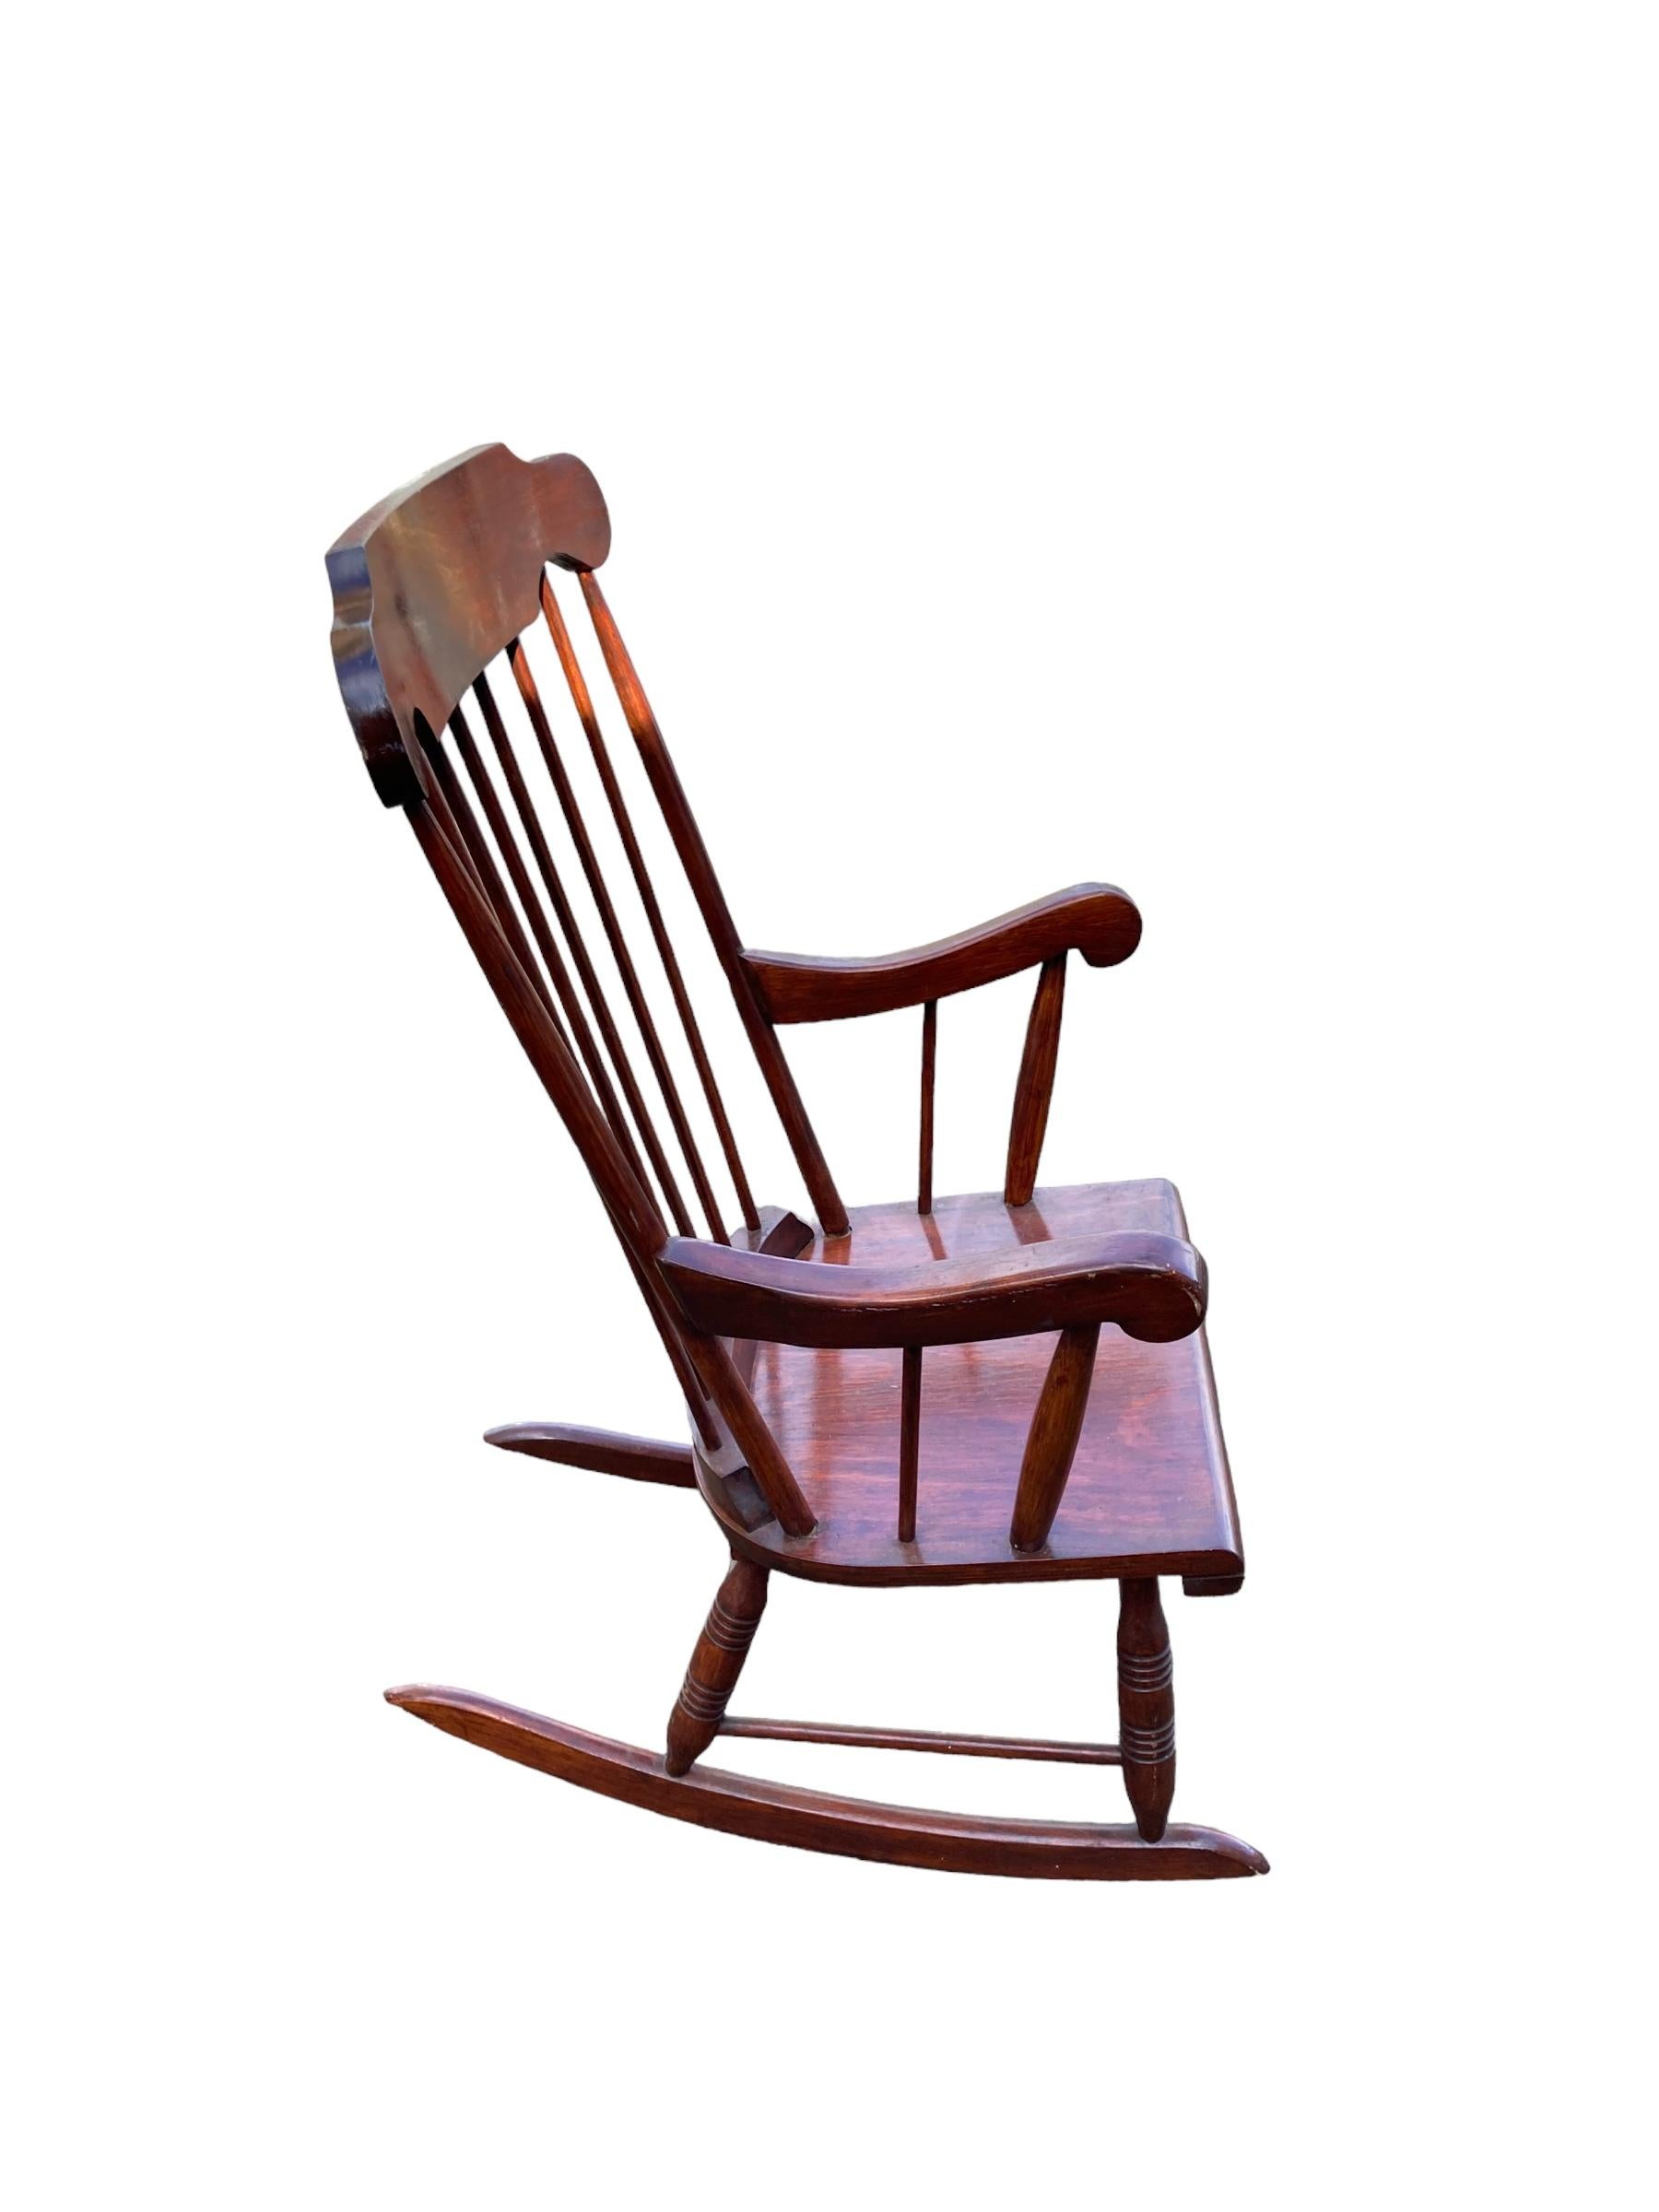 British Windsor style rocking chair, Mid 20th Century, Red Mahogany wood For Sale